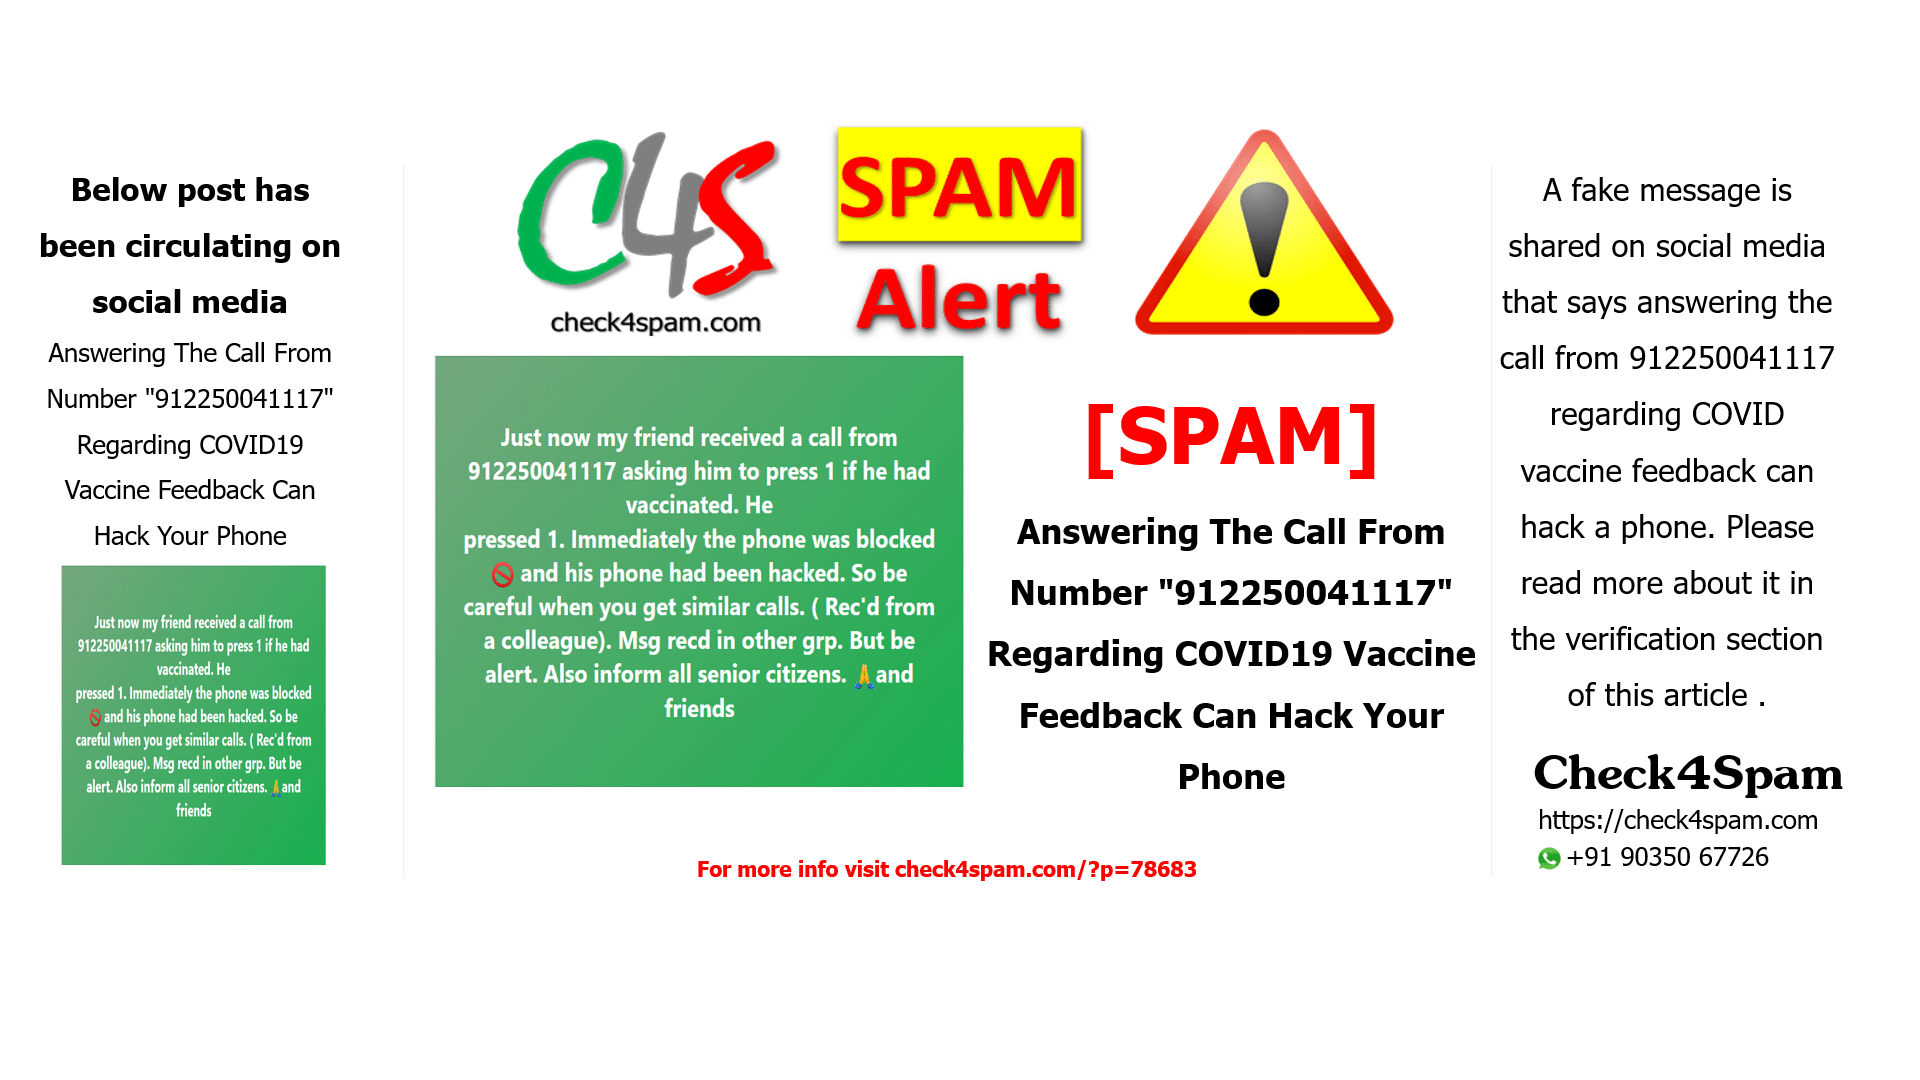 Answering The Call From Number "912250041117" Regarding COVID19 Vaccine Feedback Can Hack Your Phone